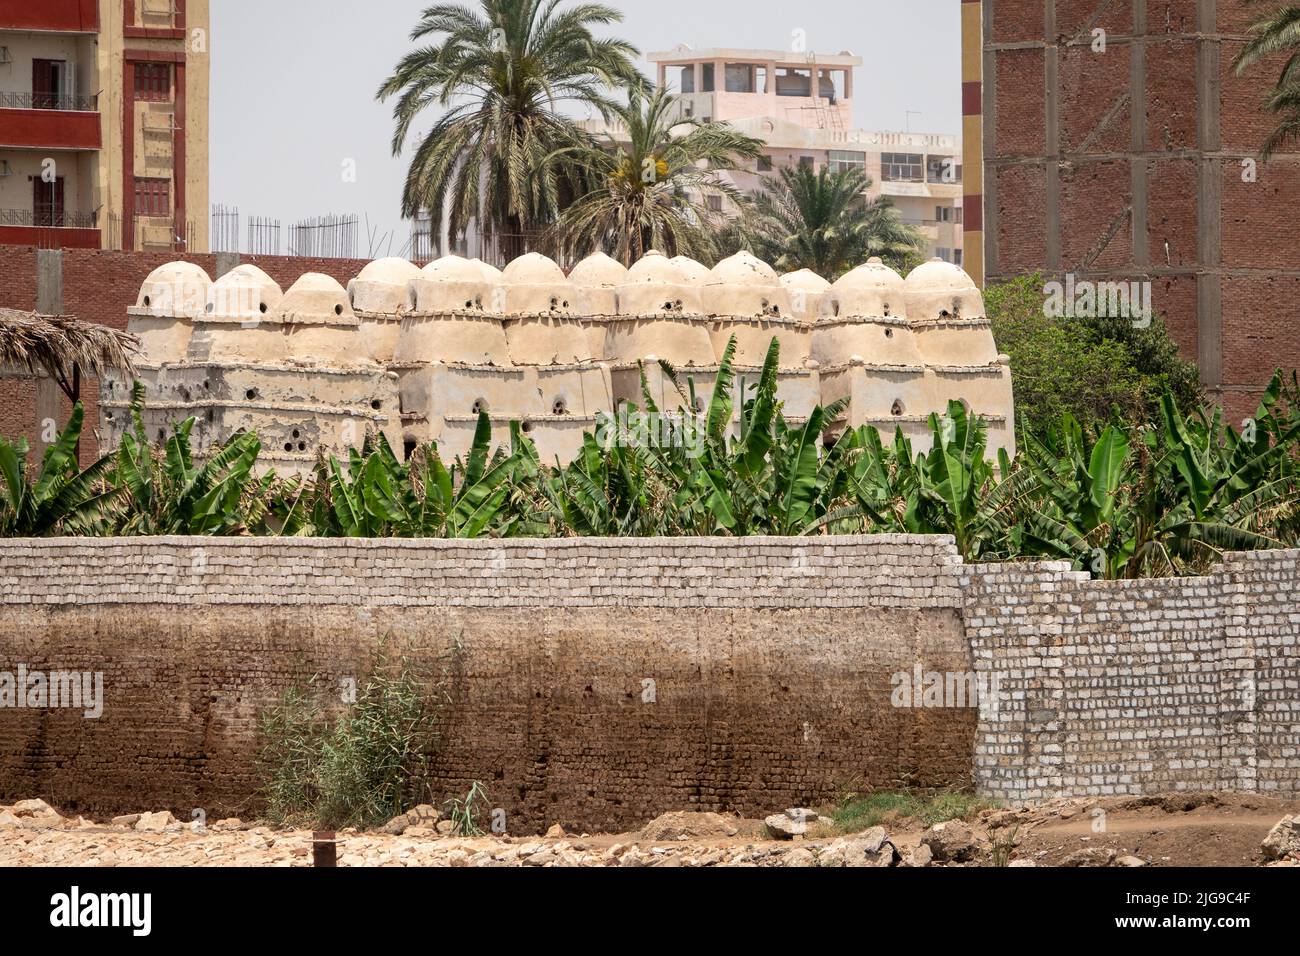 Domestic property and pigeon houses on the banks of the river Nile, Egypt Stock Photo